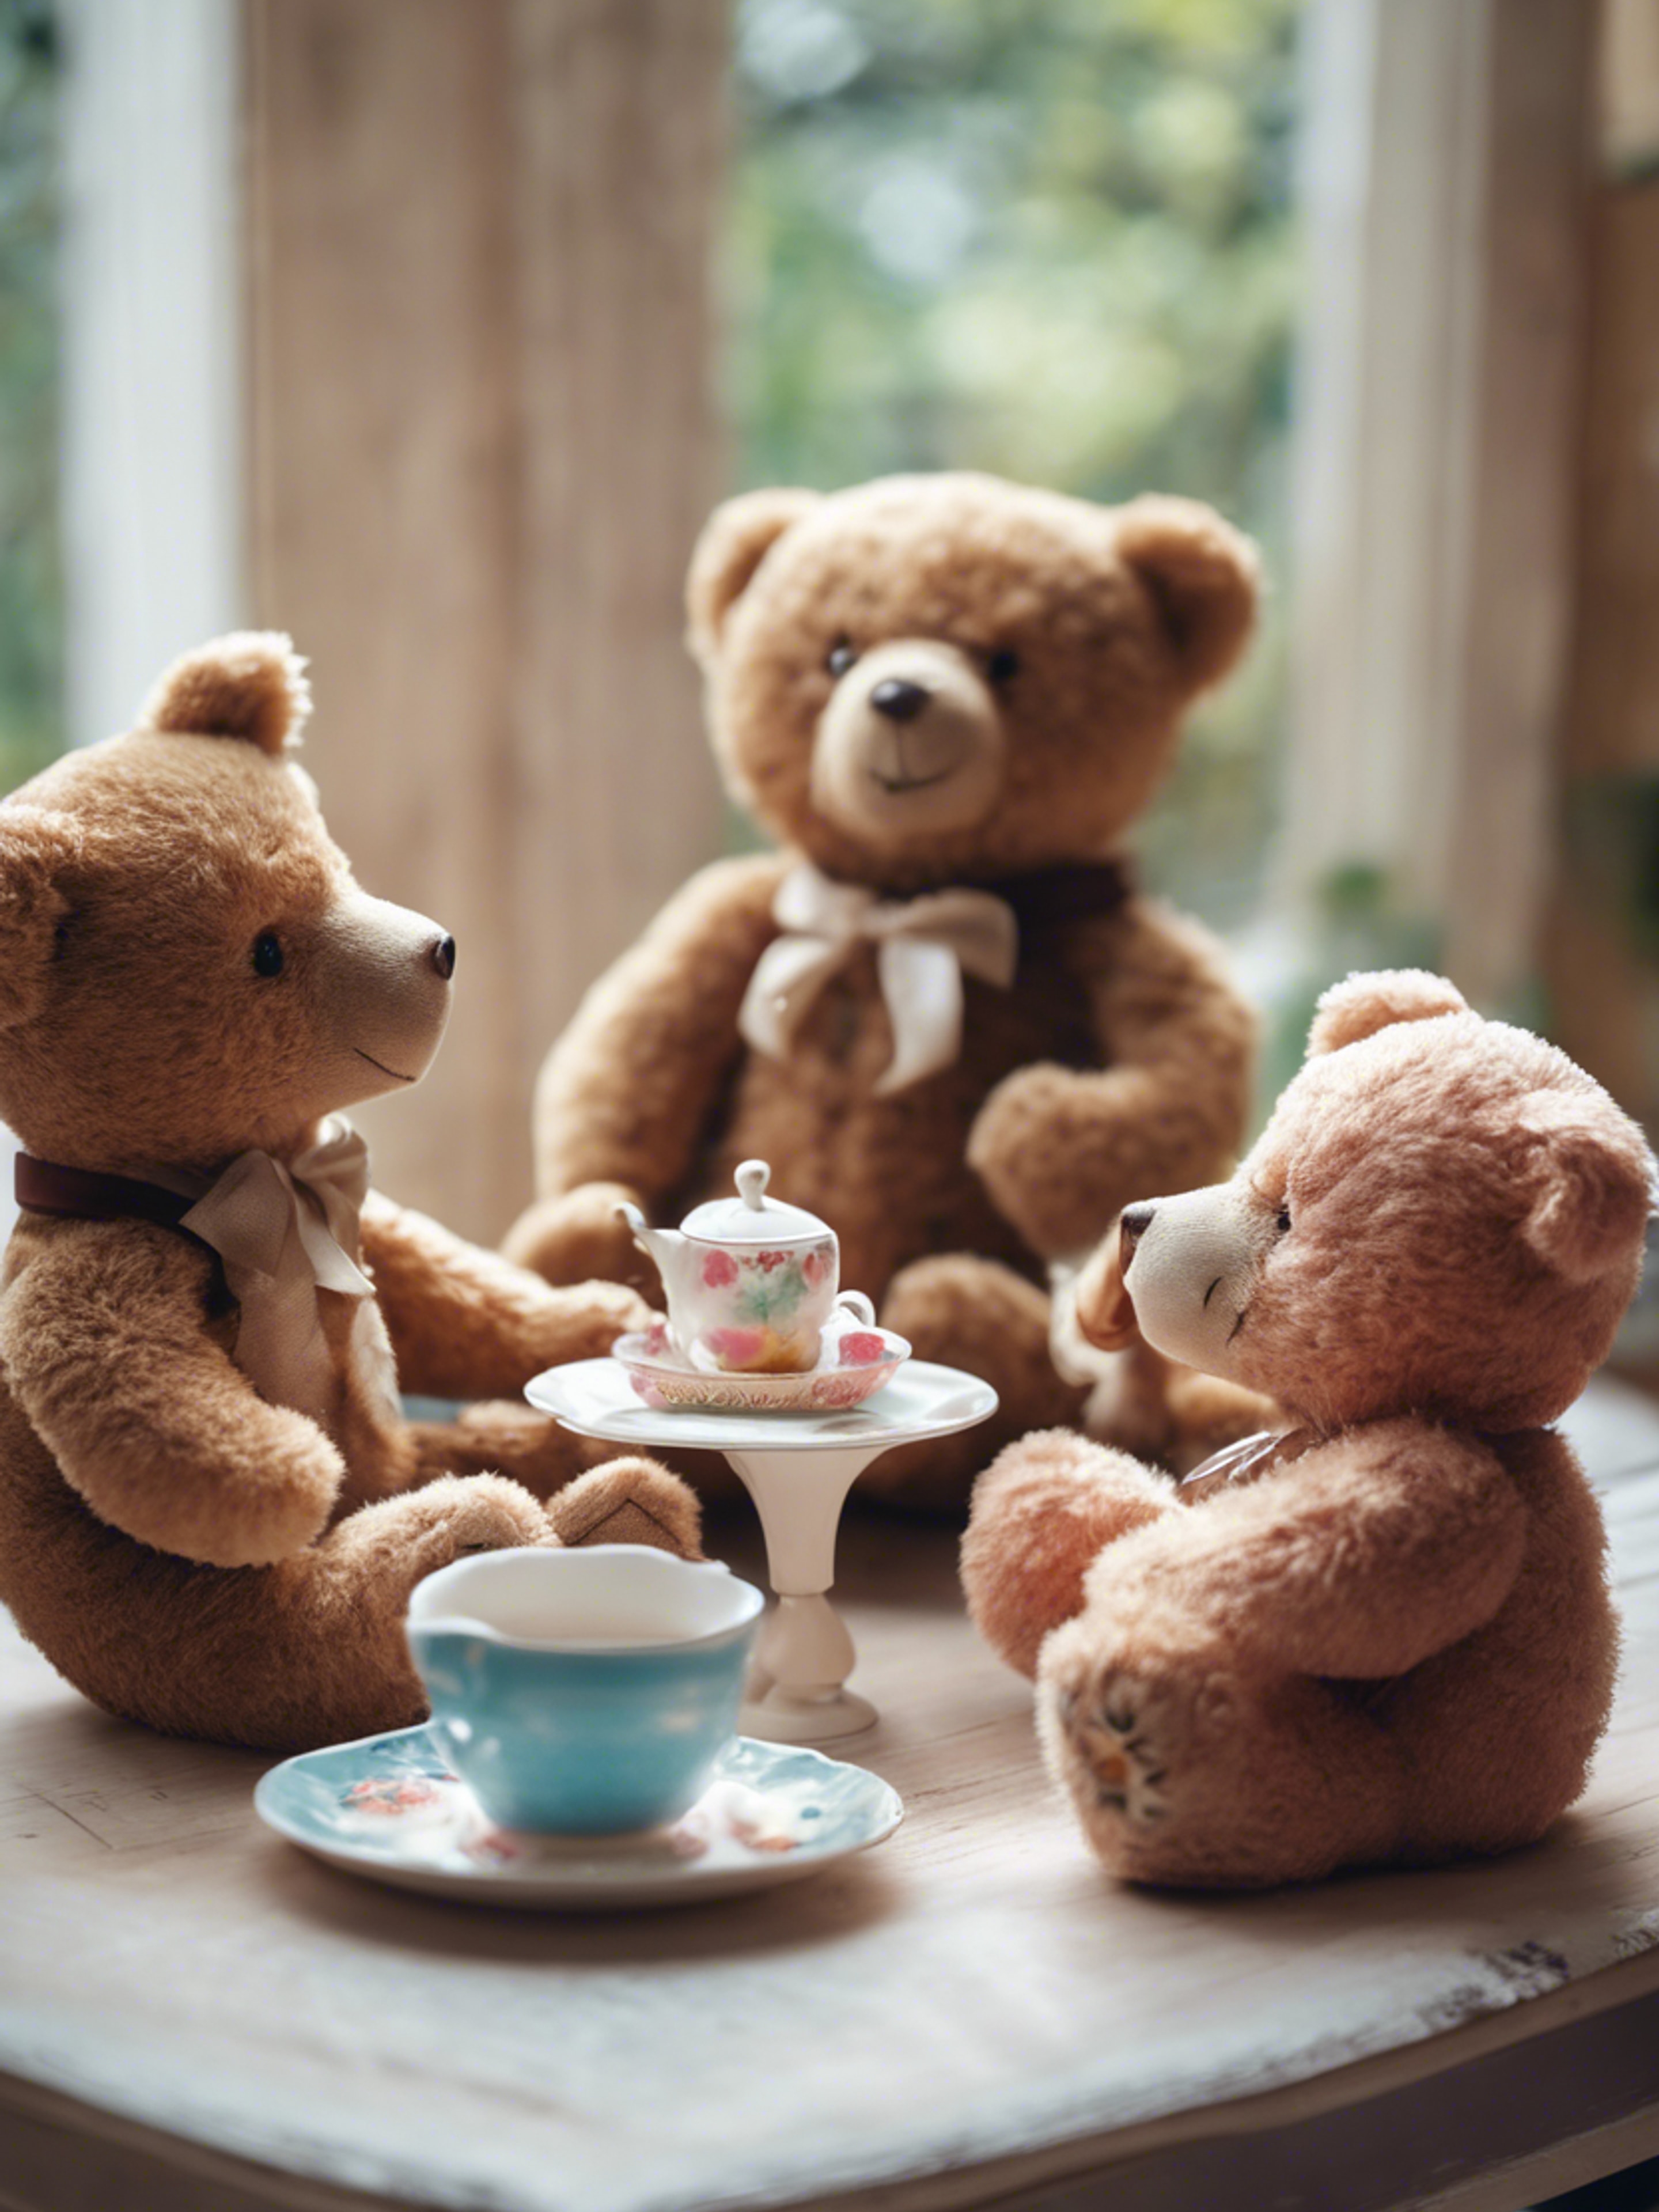 A group of teddy bears having a playful tea party in a child's room. Wallpaper[5c3b9dbbb3984ccebf50]